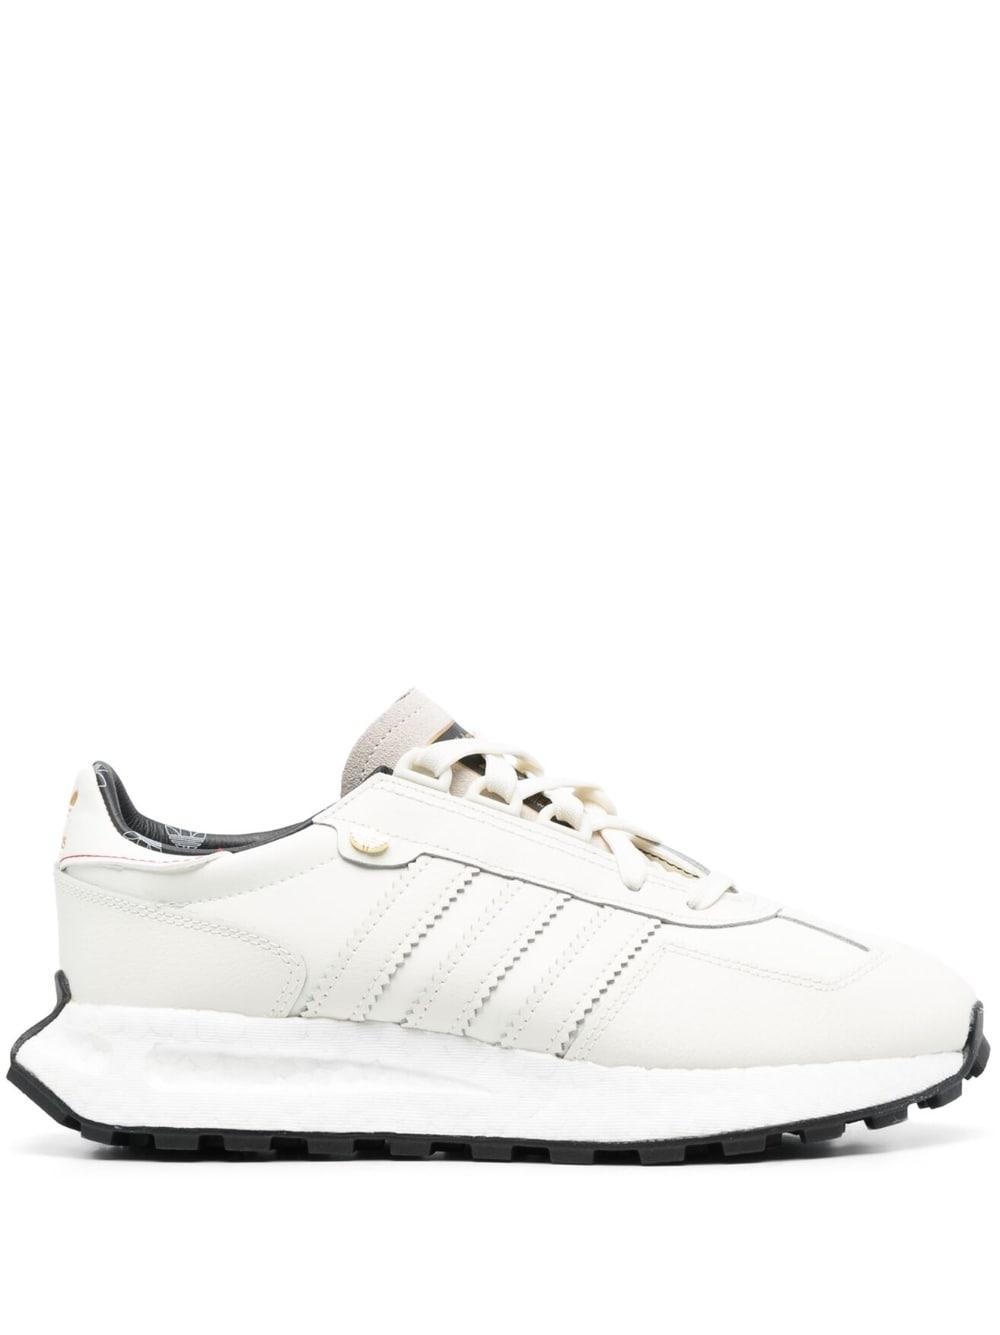 adidas Retropy E5 Leather Sneakers in White | Lyst